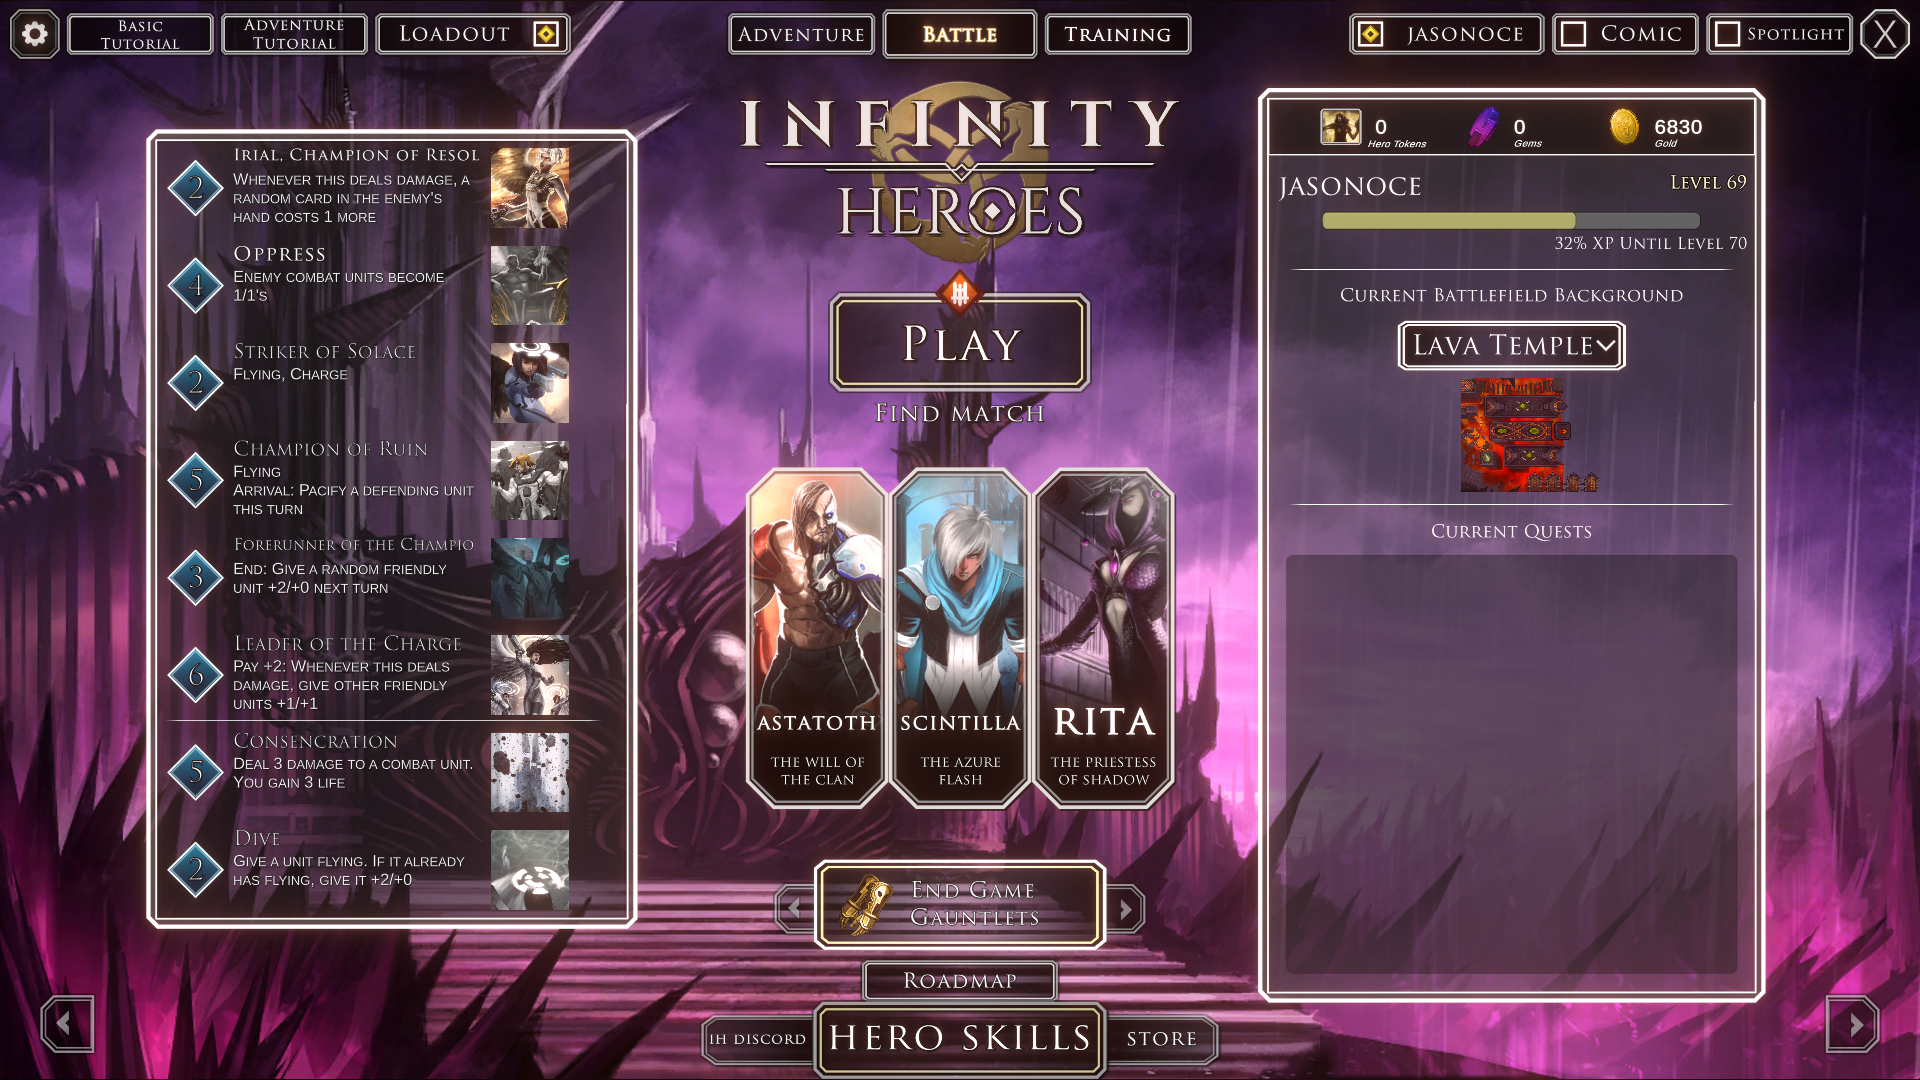 Infinity Heroes 0.9 update - Quests, account info and layout